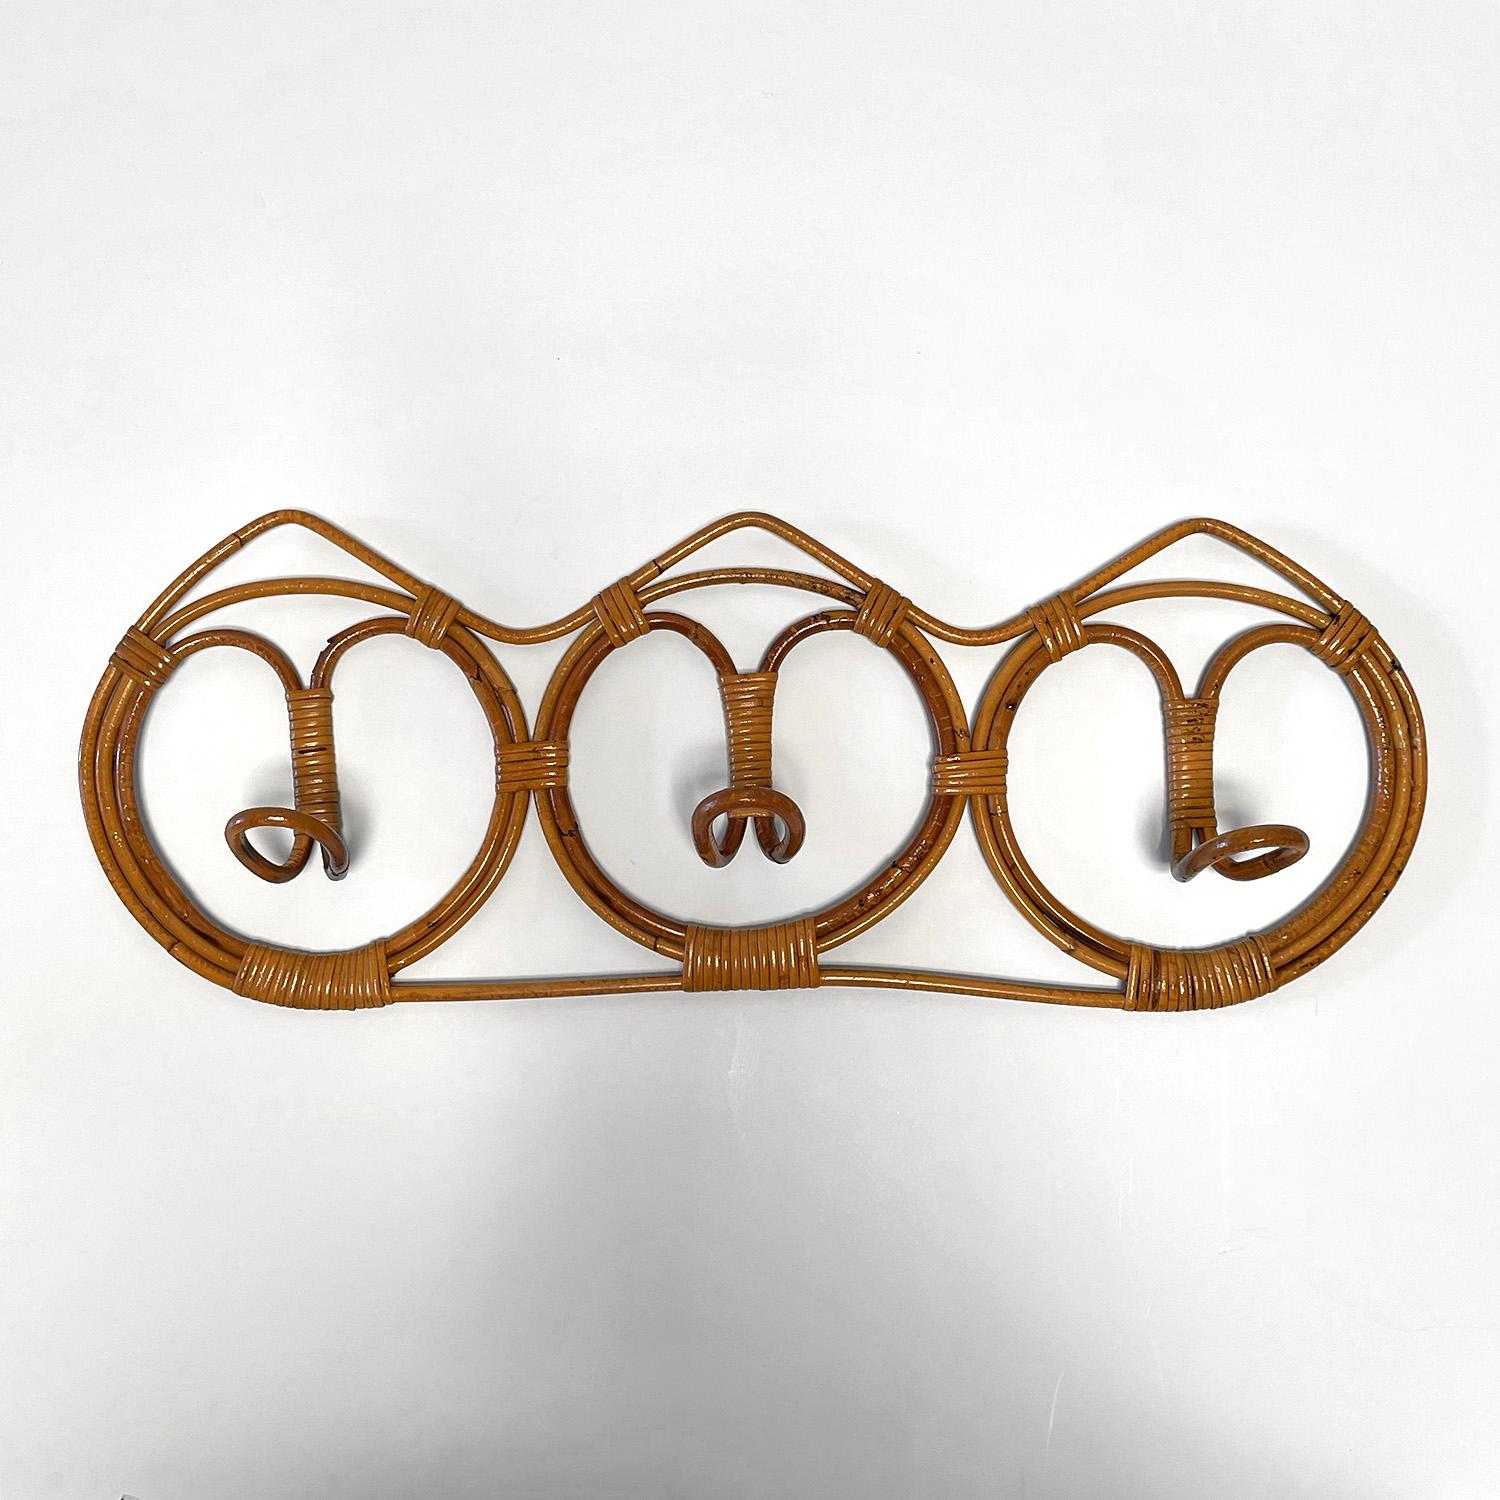 Franco Albini and Franca Helg rattan coat rack
Produced by Bonacina
Italy, circa 1960’s
Beautiful variations in the rattan
Hand woven detail
3 hooks
Italian midcentury at its finest.